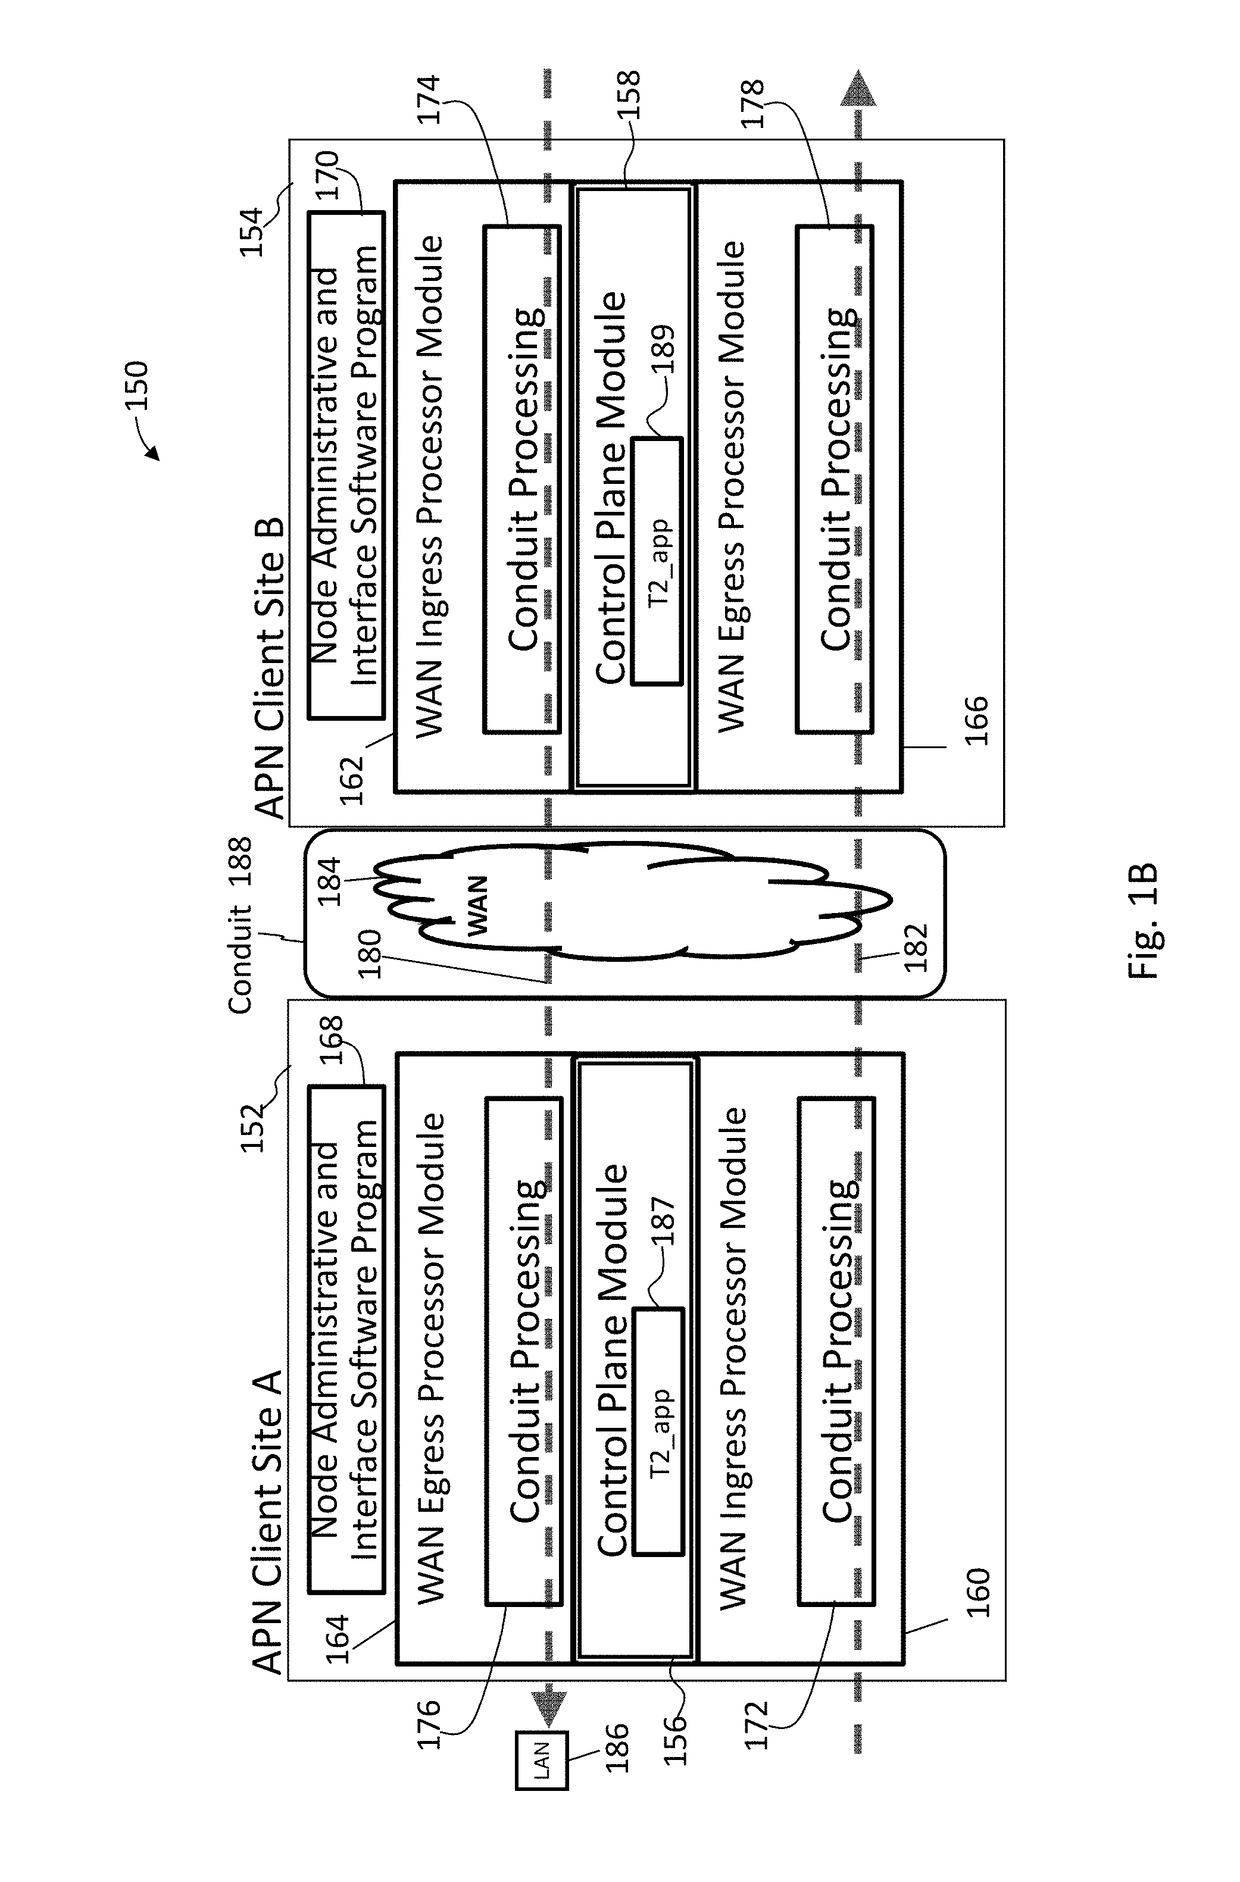 Methods and apparatus for accessing dynamic routing information from networks coupled to a wide area network (WAN) to determine optimized end-to-end routing paths